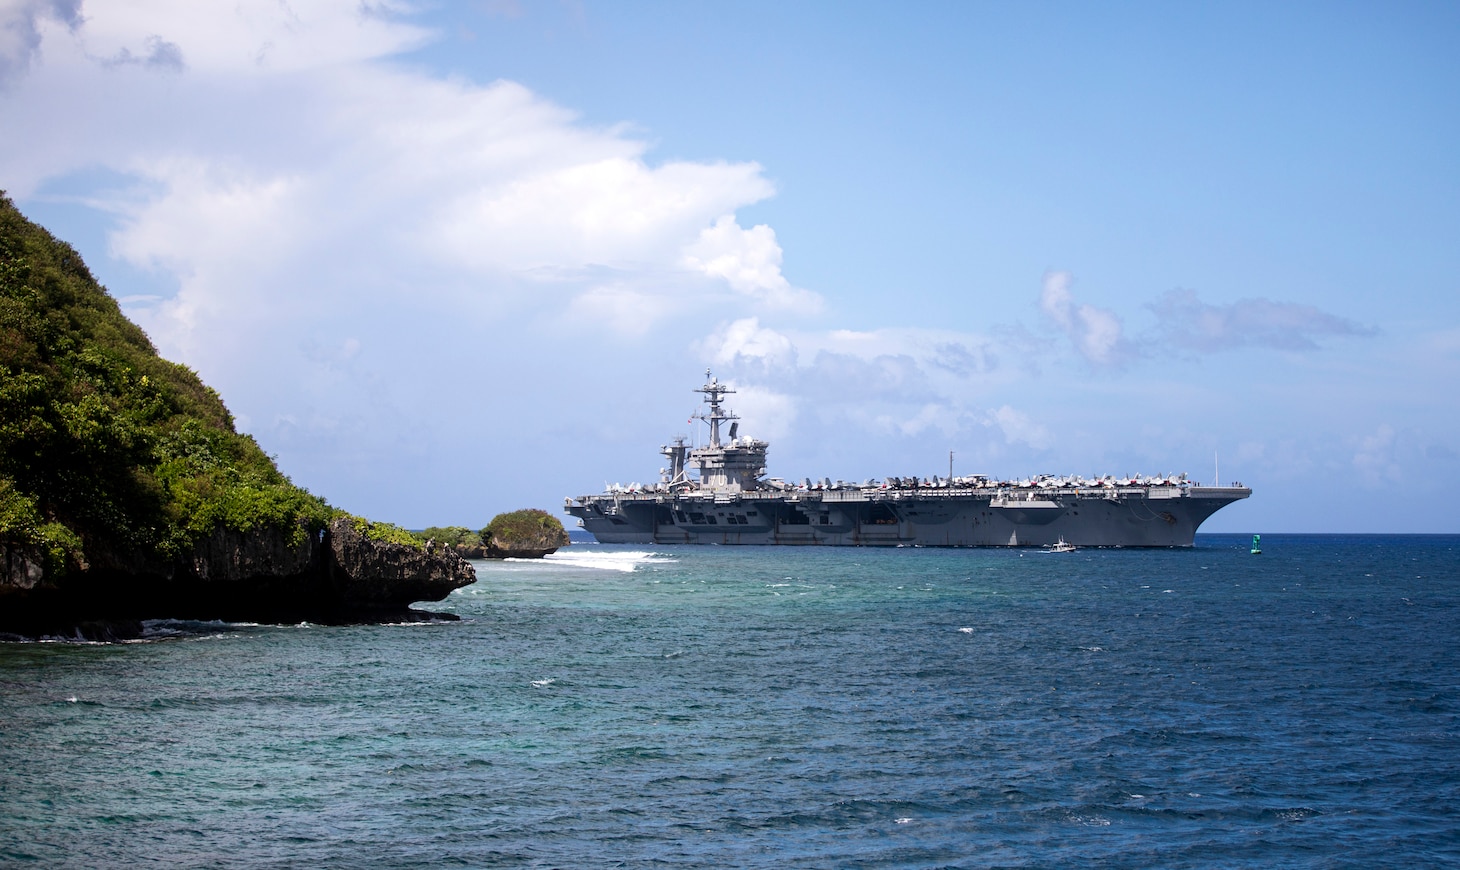 APRA HARBOR, Guam (Nov. 11, 2021) – The Nimitz-class aircraft carrier USS Carl Vinson (CVN 70) arrives at Guam for a port visit. The arrival of Carl Vinson Carrier Strike Group marks the first time that a carrier strike group with the advanced capabilities of the F-35C Lightning II and Navy CMV-22B Osprey have visited Guam. Carl Vinson Strike Group is on a scheduled deployment in the U.S. 7th Fleet area of operations to enhance interoperability through alliances and partnerships while serving as a ready response force in support of a free and open Indo-Pacific region. (U.S. Navy photo by Mass Communication Specialist 1st Class Devin M. Langer)